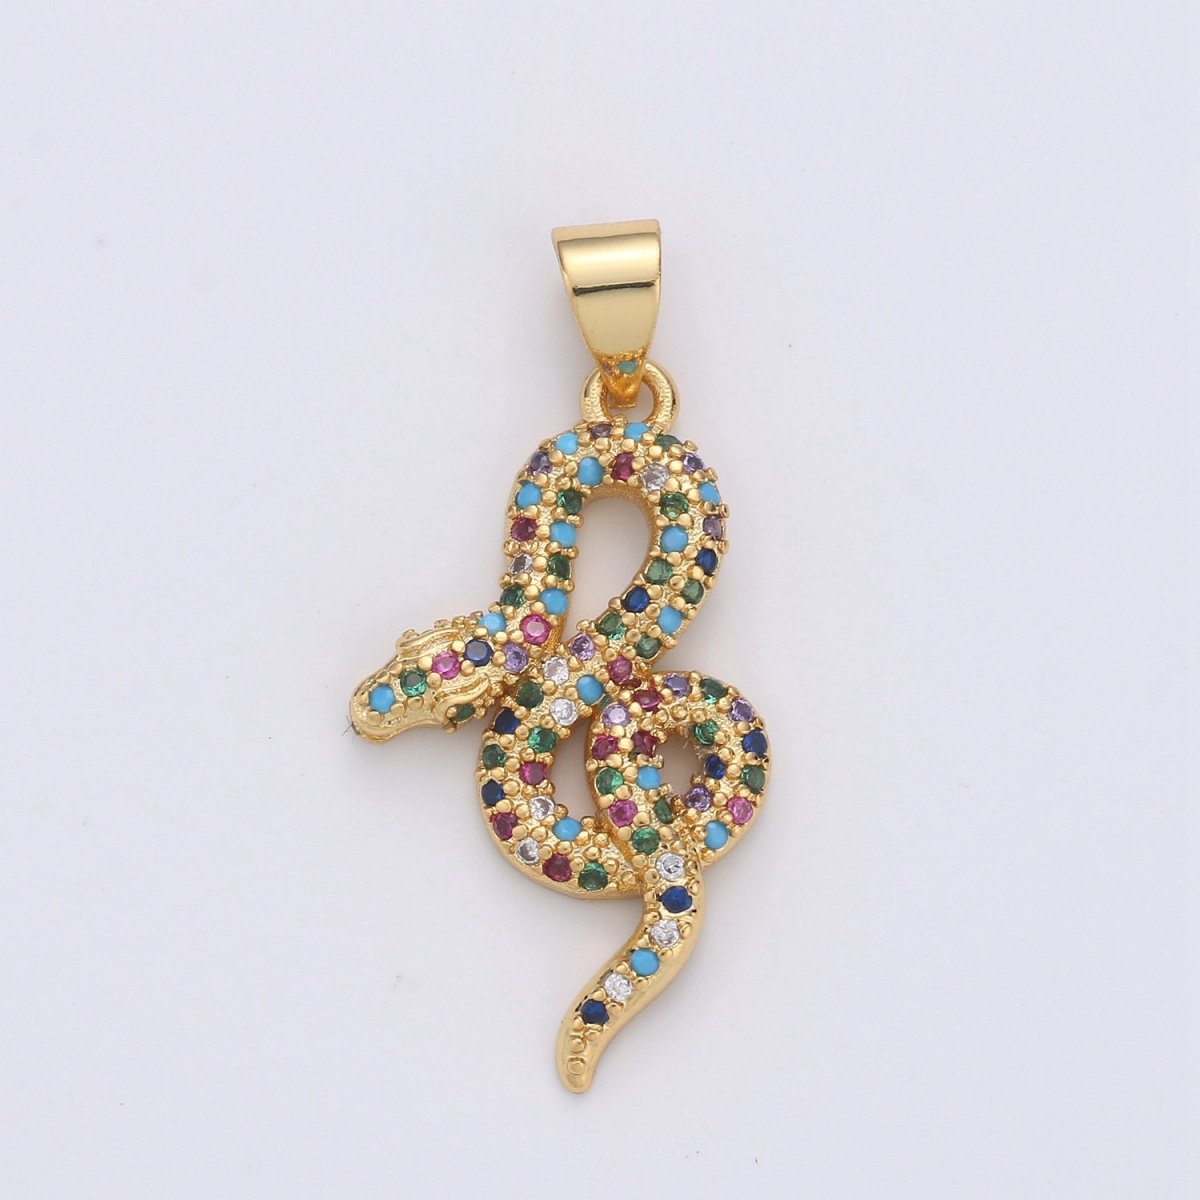 Cubic Gold snake charm Pendant, Micro Pave snake charms, Dainty pendant Jewelry in 14k Gold Filled I-662 I-663 - DLUXCA